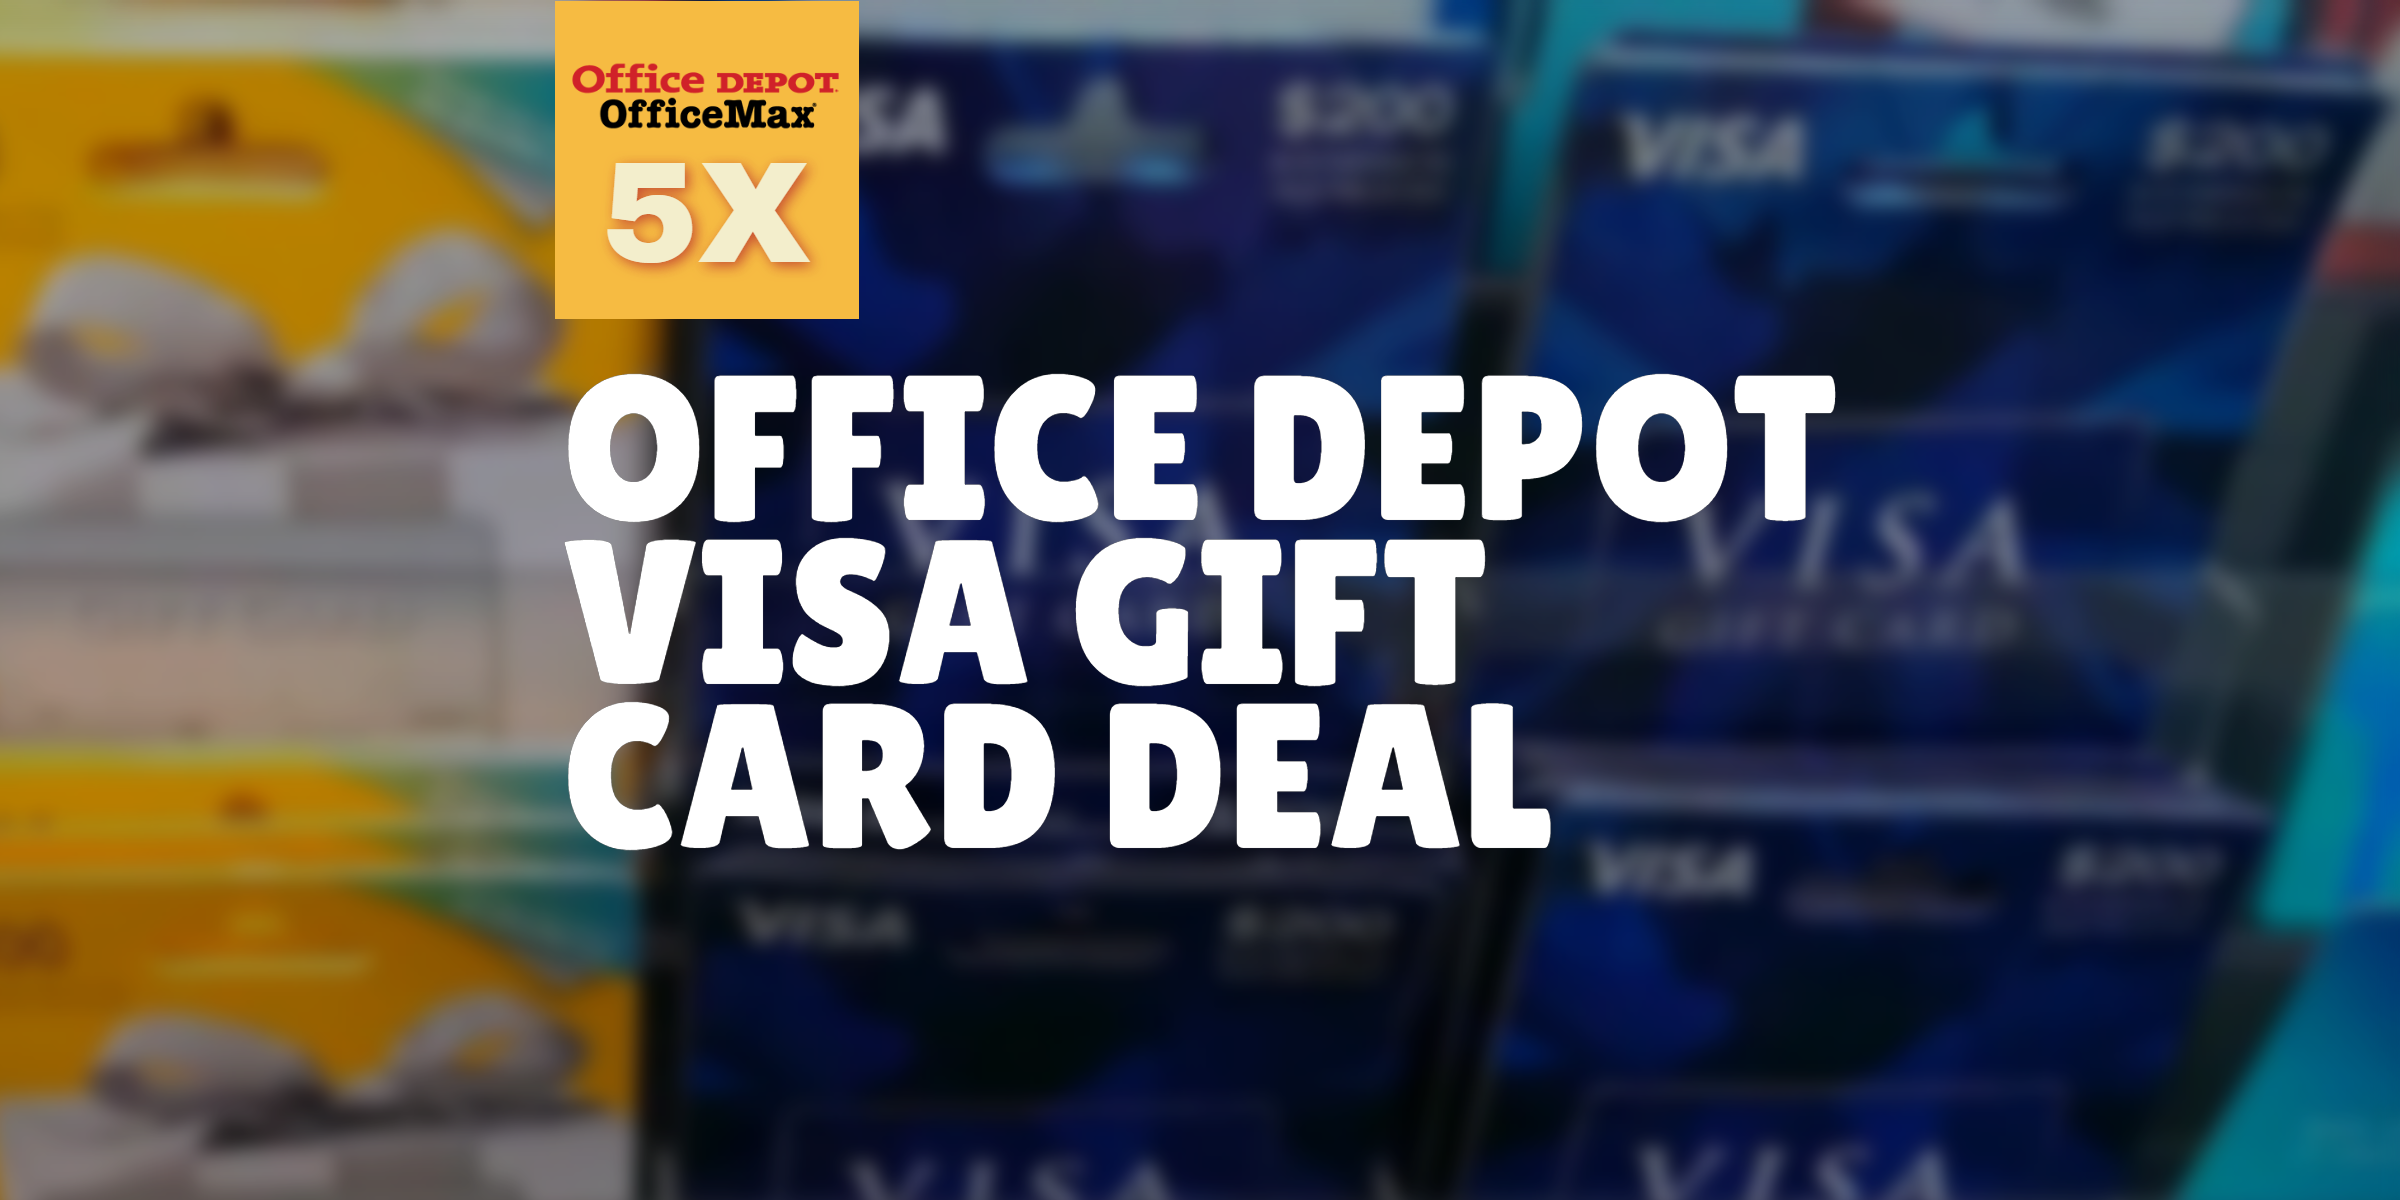 Issues) Profitable Office Depot/Max Visa Gift Card Deal Returns + 5X  Ultimate Rewards! - Miles to Memories